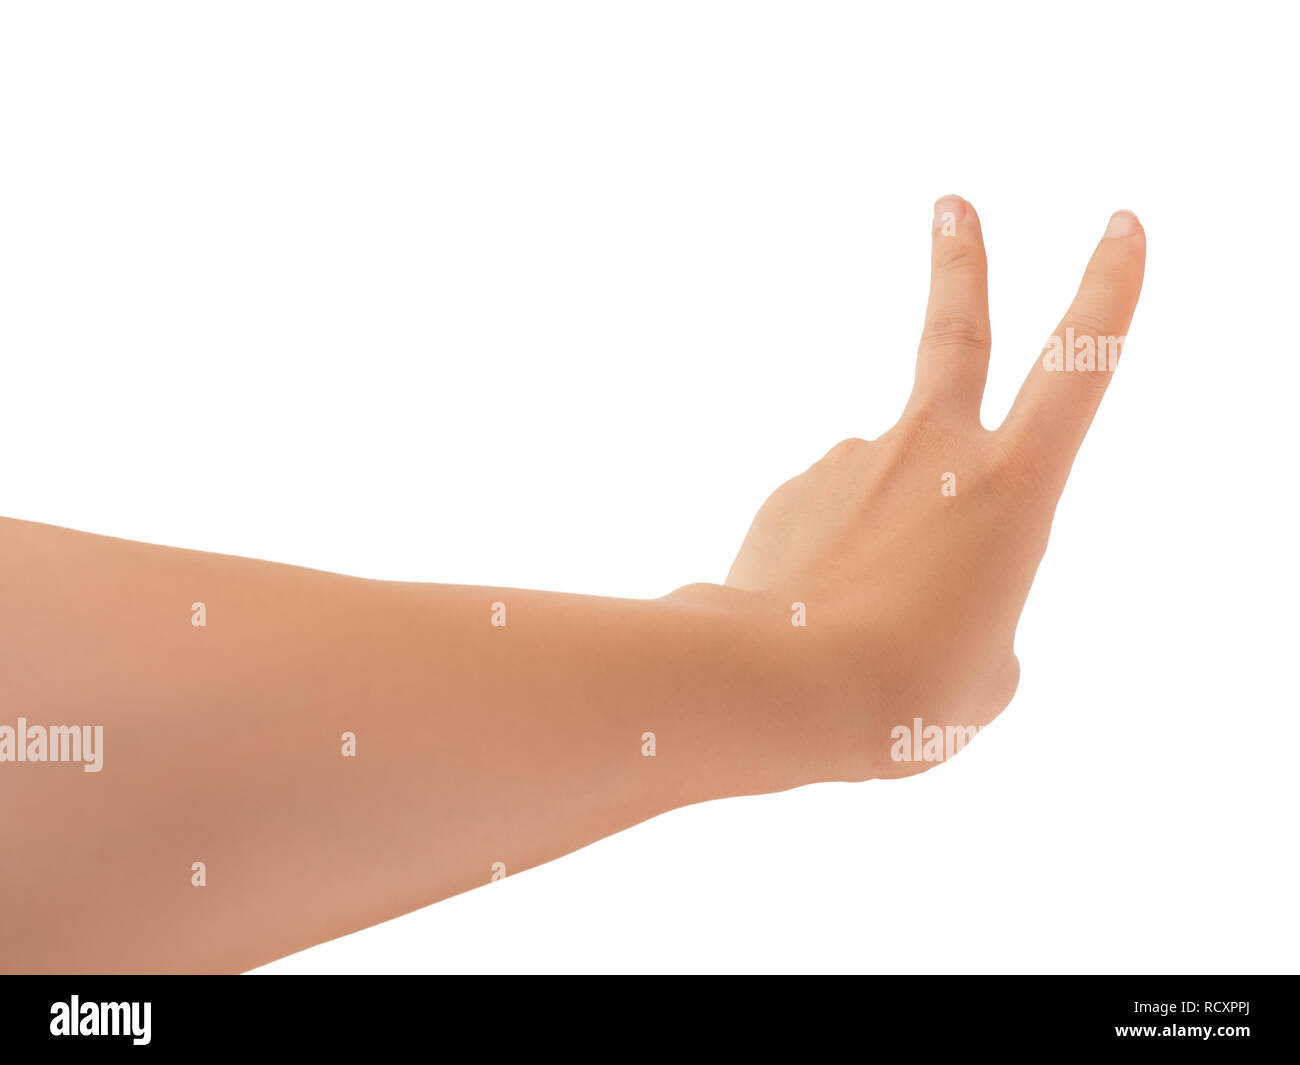 Human hand in reach out one's hand and counting number two or victory sign gesture isolate on white background with clipping path, High resolution and Stock Photo